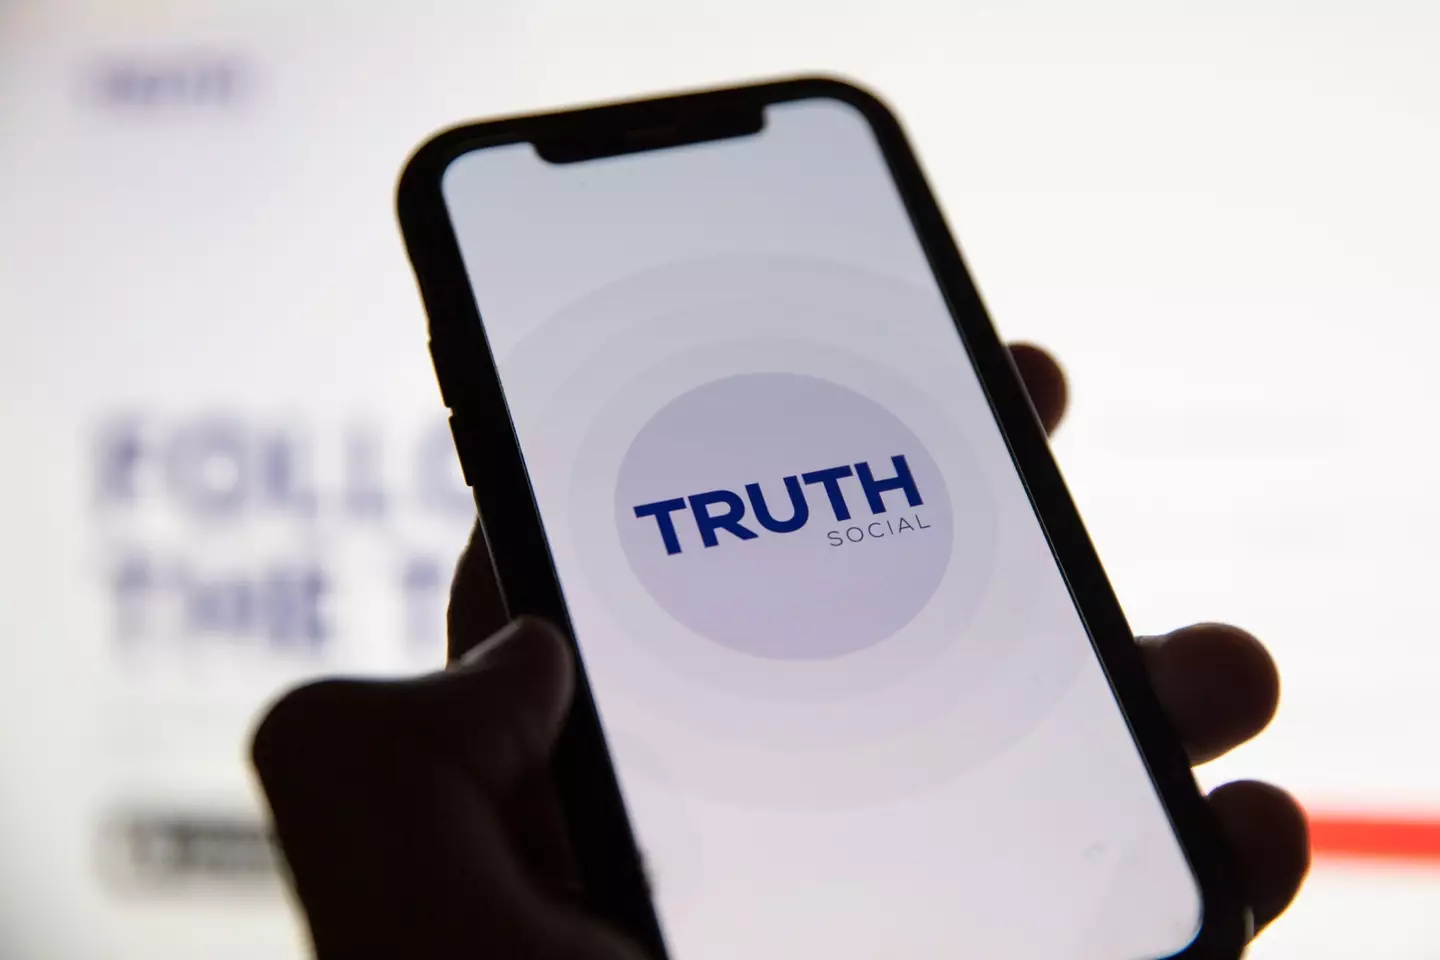 TRUTH Social has dipped by more than 90 percent since March.